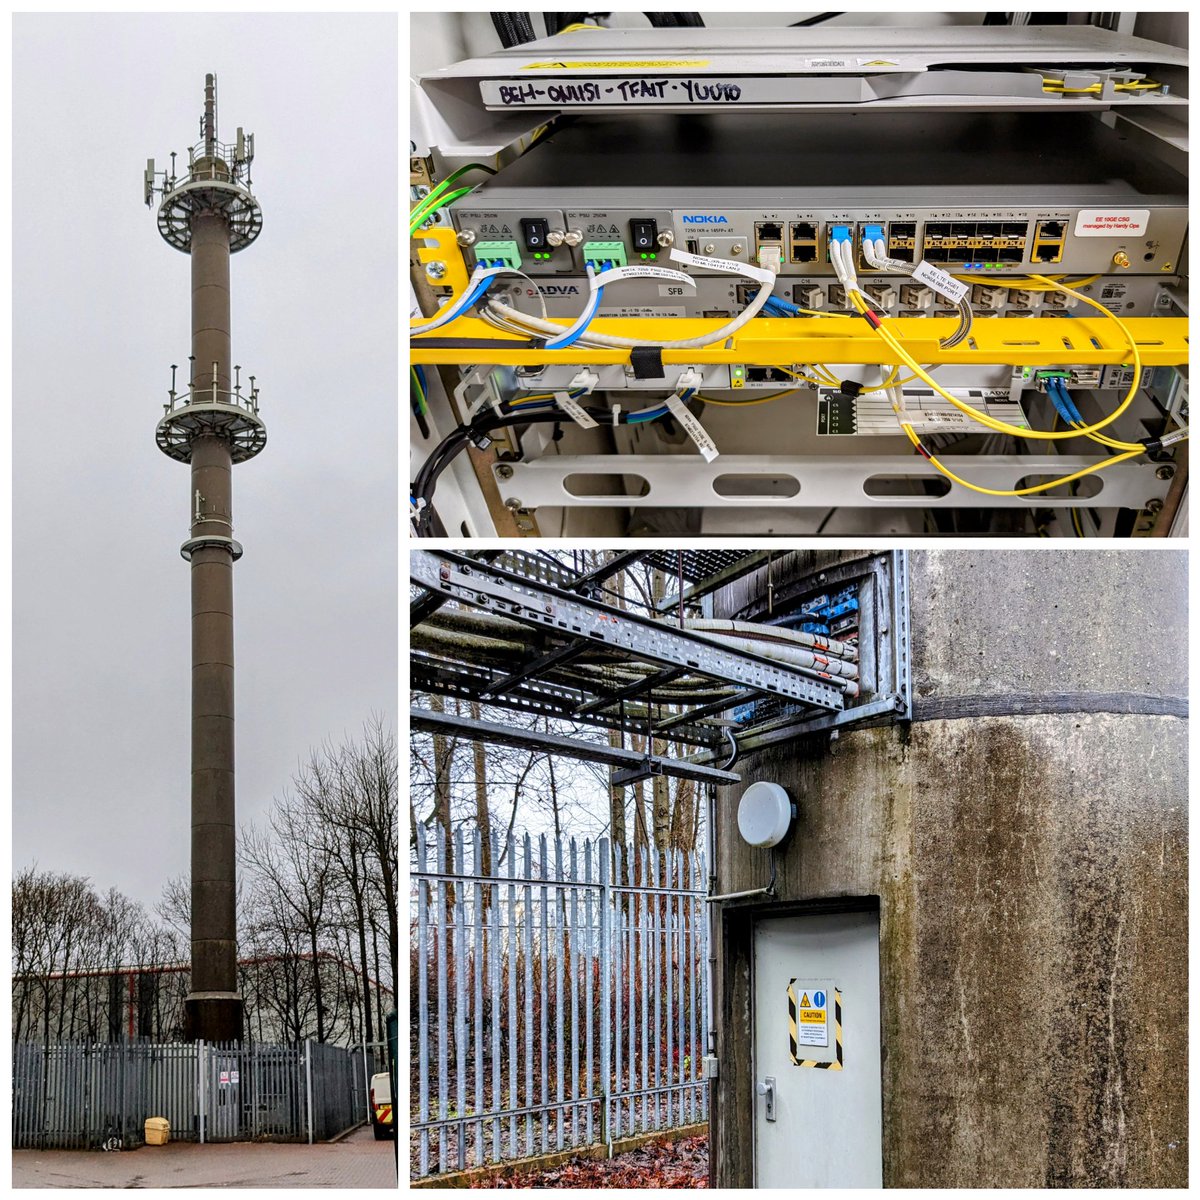 A stark example of the success of a fibre first strategy, a tower which was packed with microwave links is now empty, even the local base station is connected by fibre... This said, microwave radio still has a big role to play in the wider network #4G #LTE #5G #mobilebackhaul